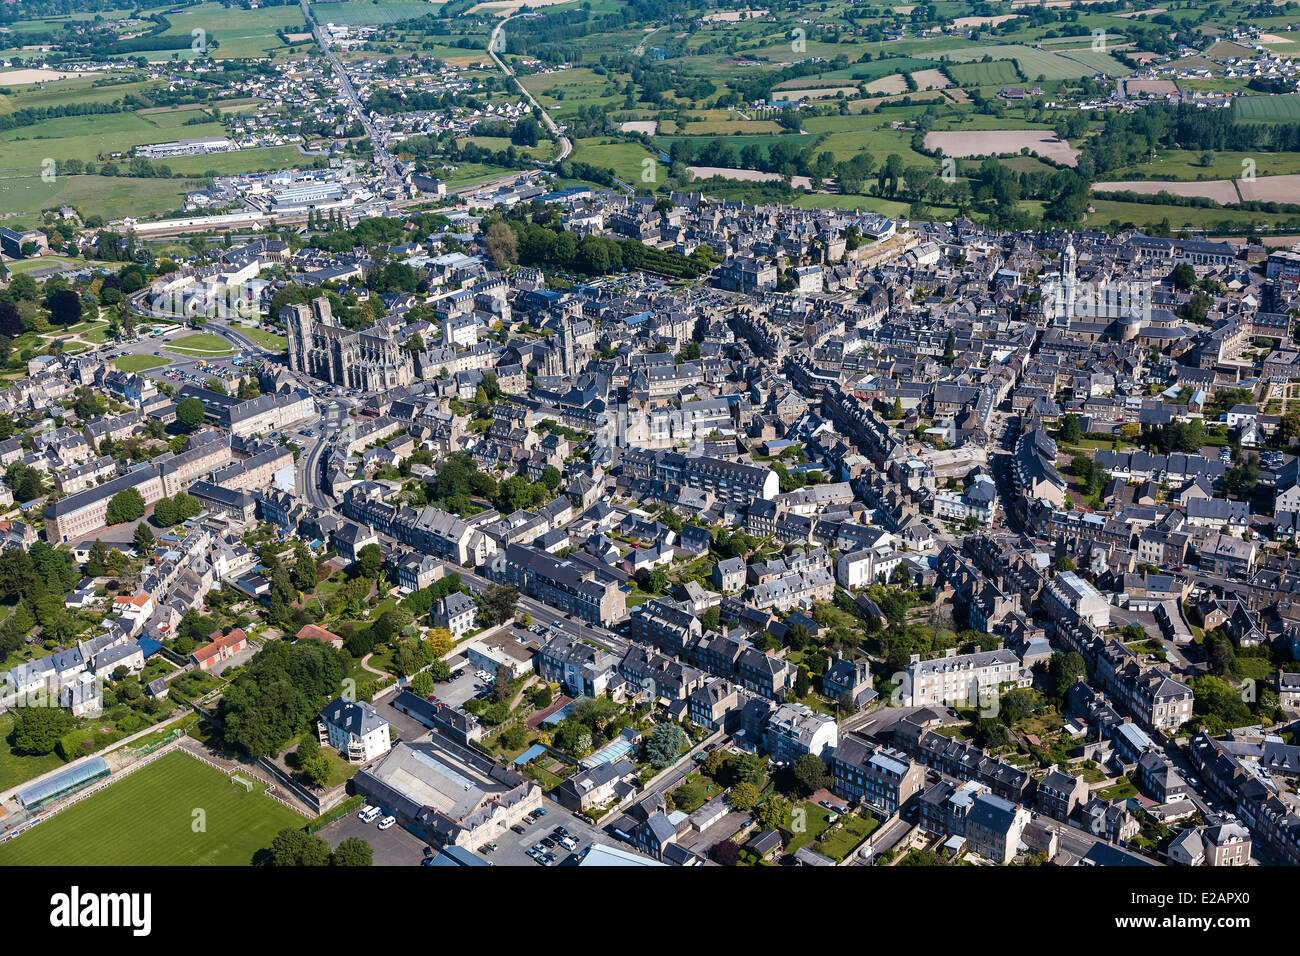 France, Manche, Avranches (aerial view) Stock Photo